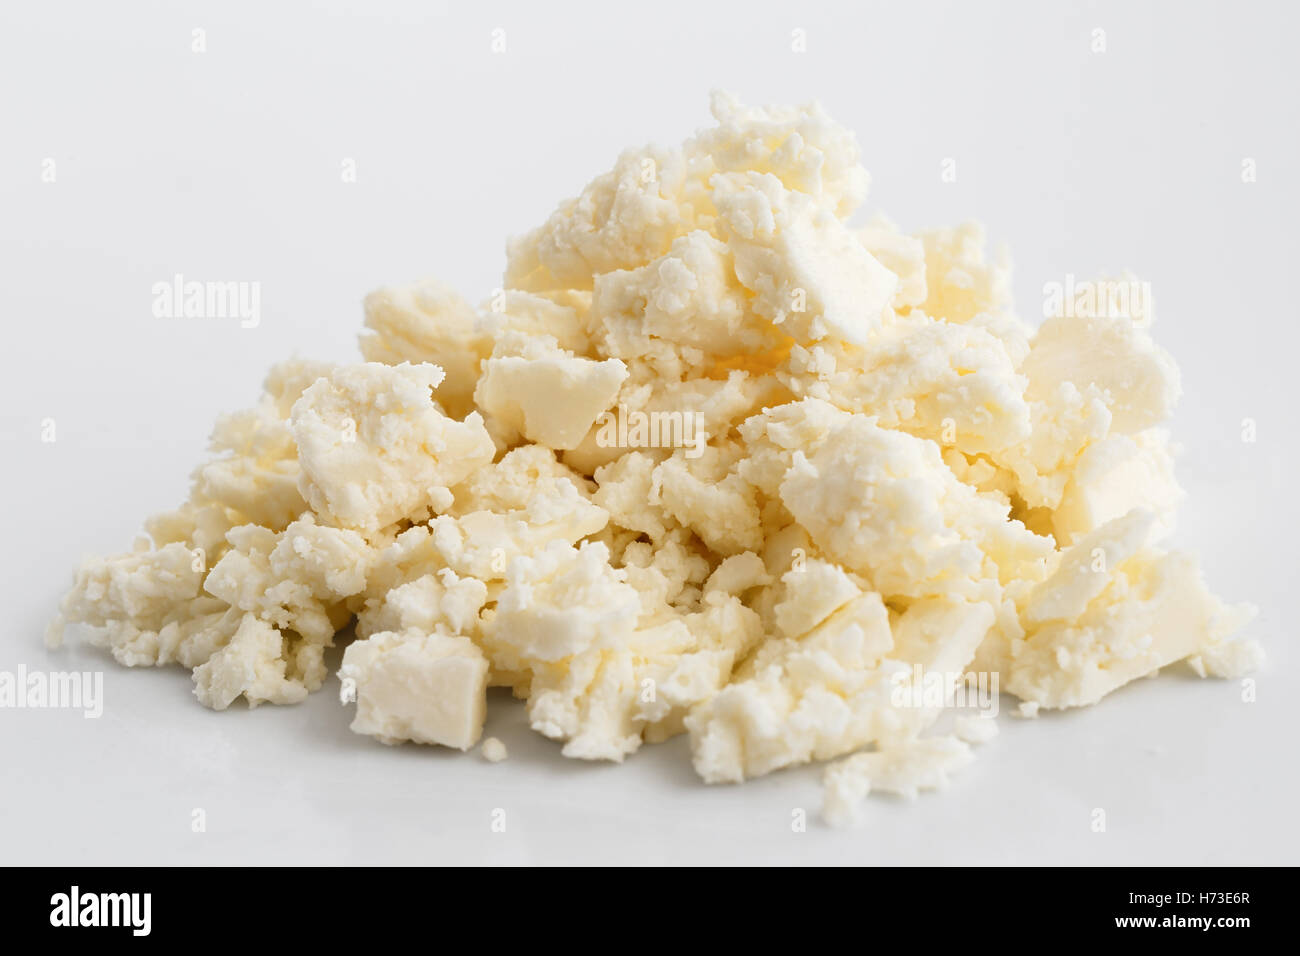 Crumbled white feta cheese isolated on white surface. Stock Photo